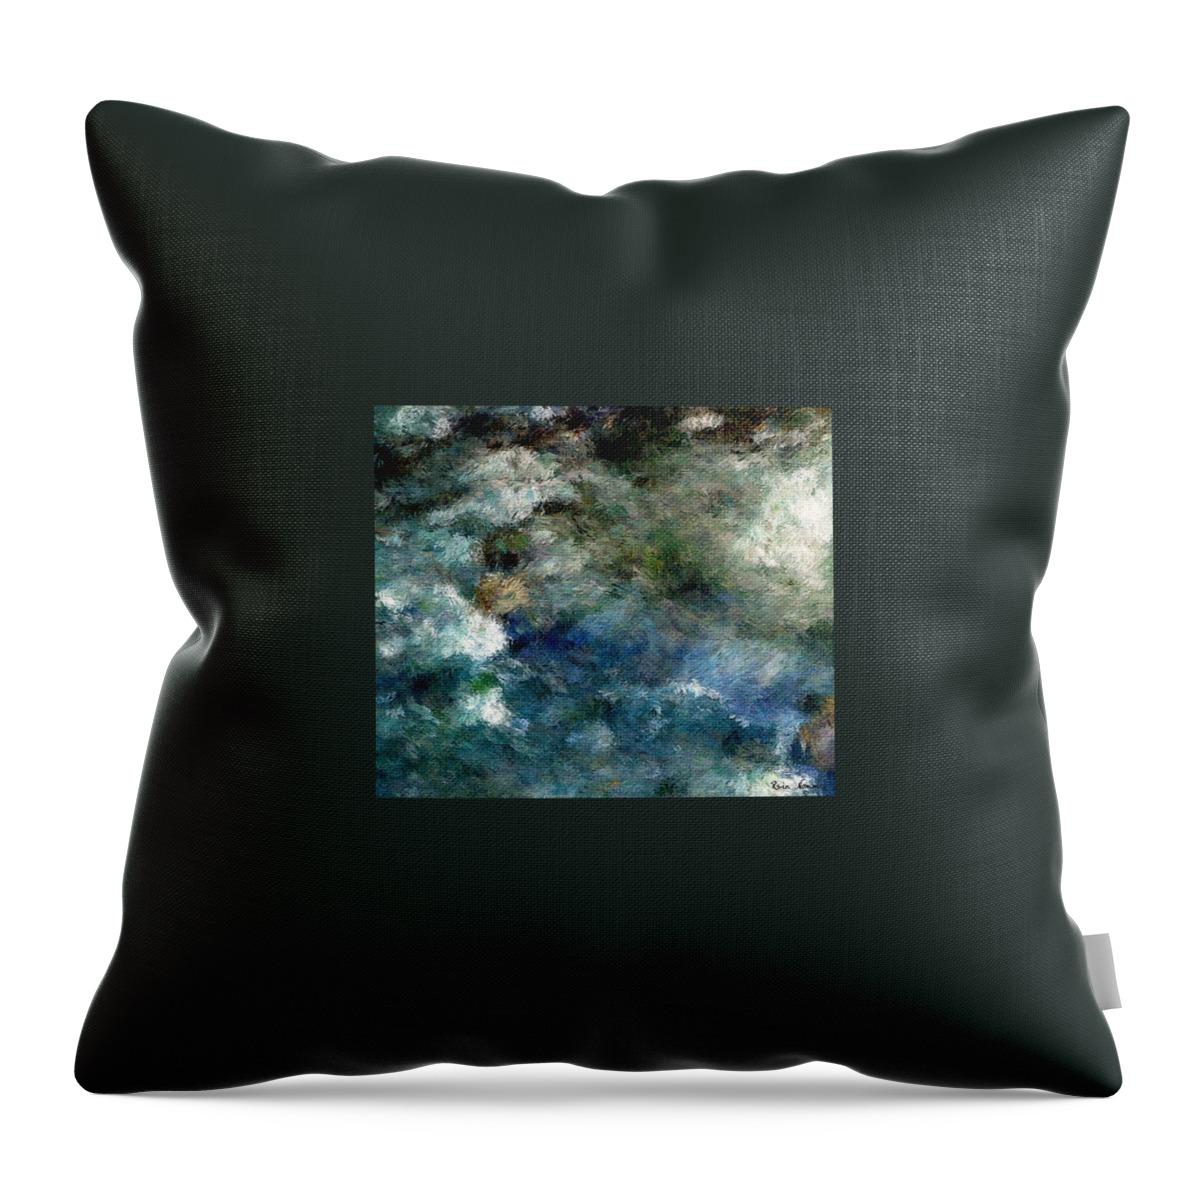  Throw Pillow featuring the digital art Of Time and the River #1 by Rein Nomm